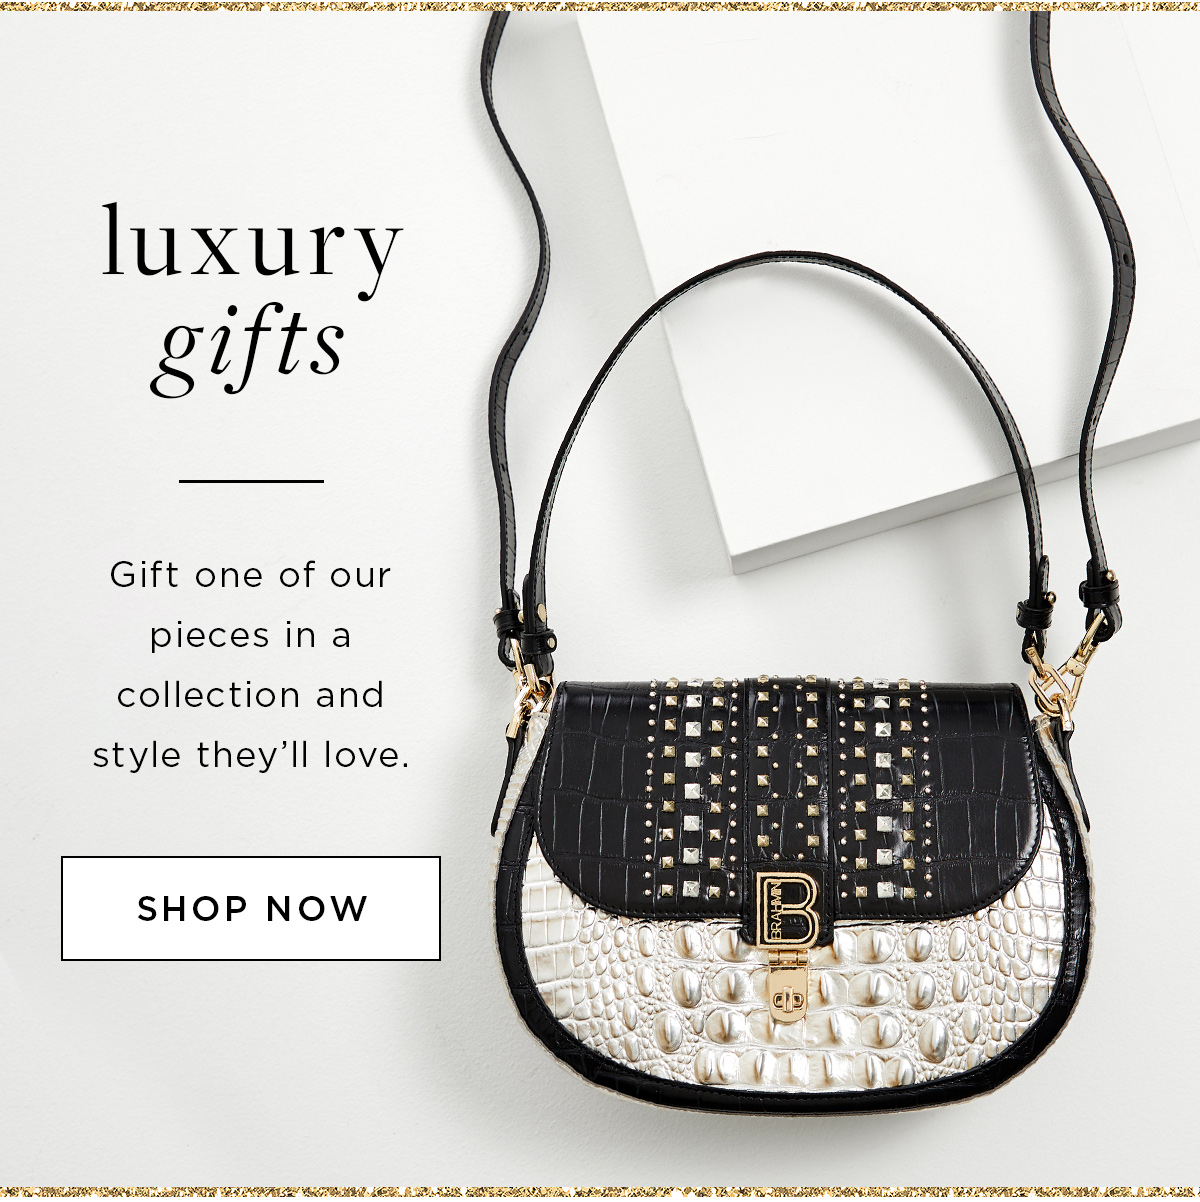 luxury gifts Gift one of our pieces in a collection and style they'll love. SHOP NOW